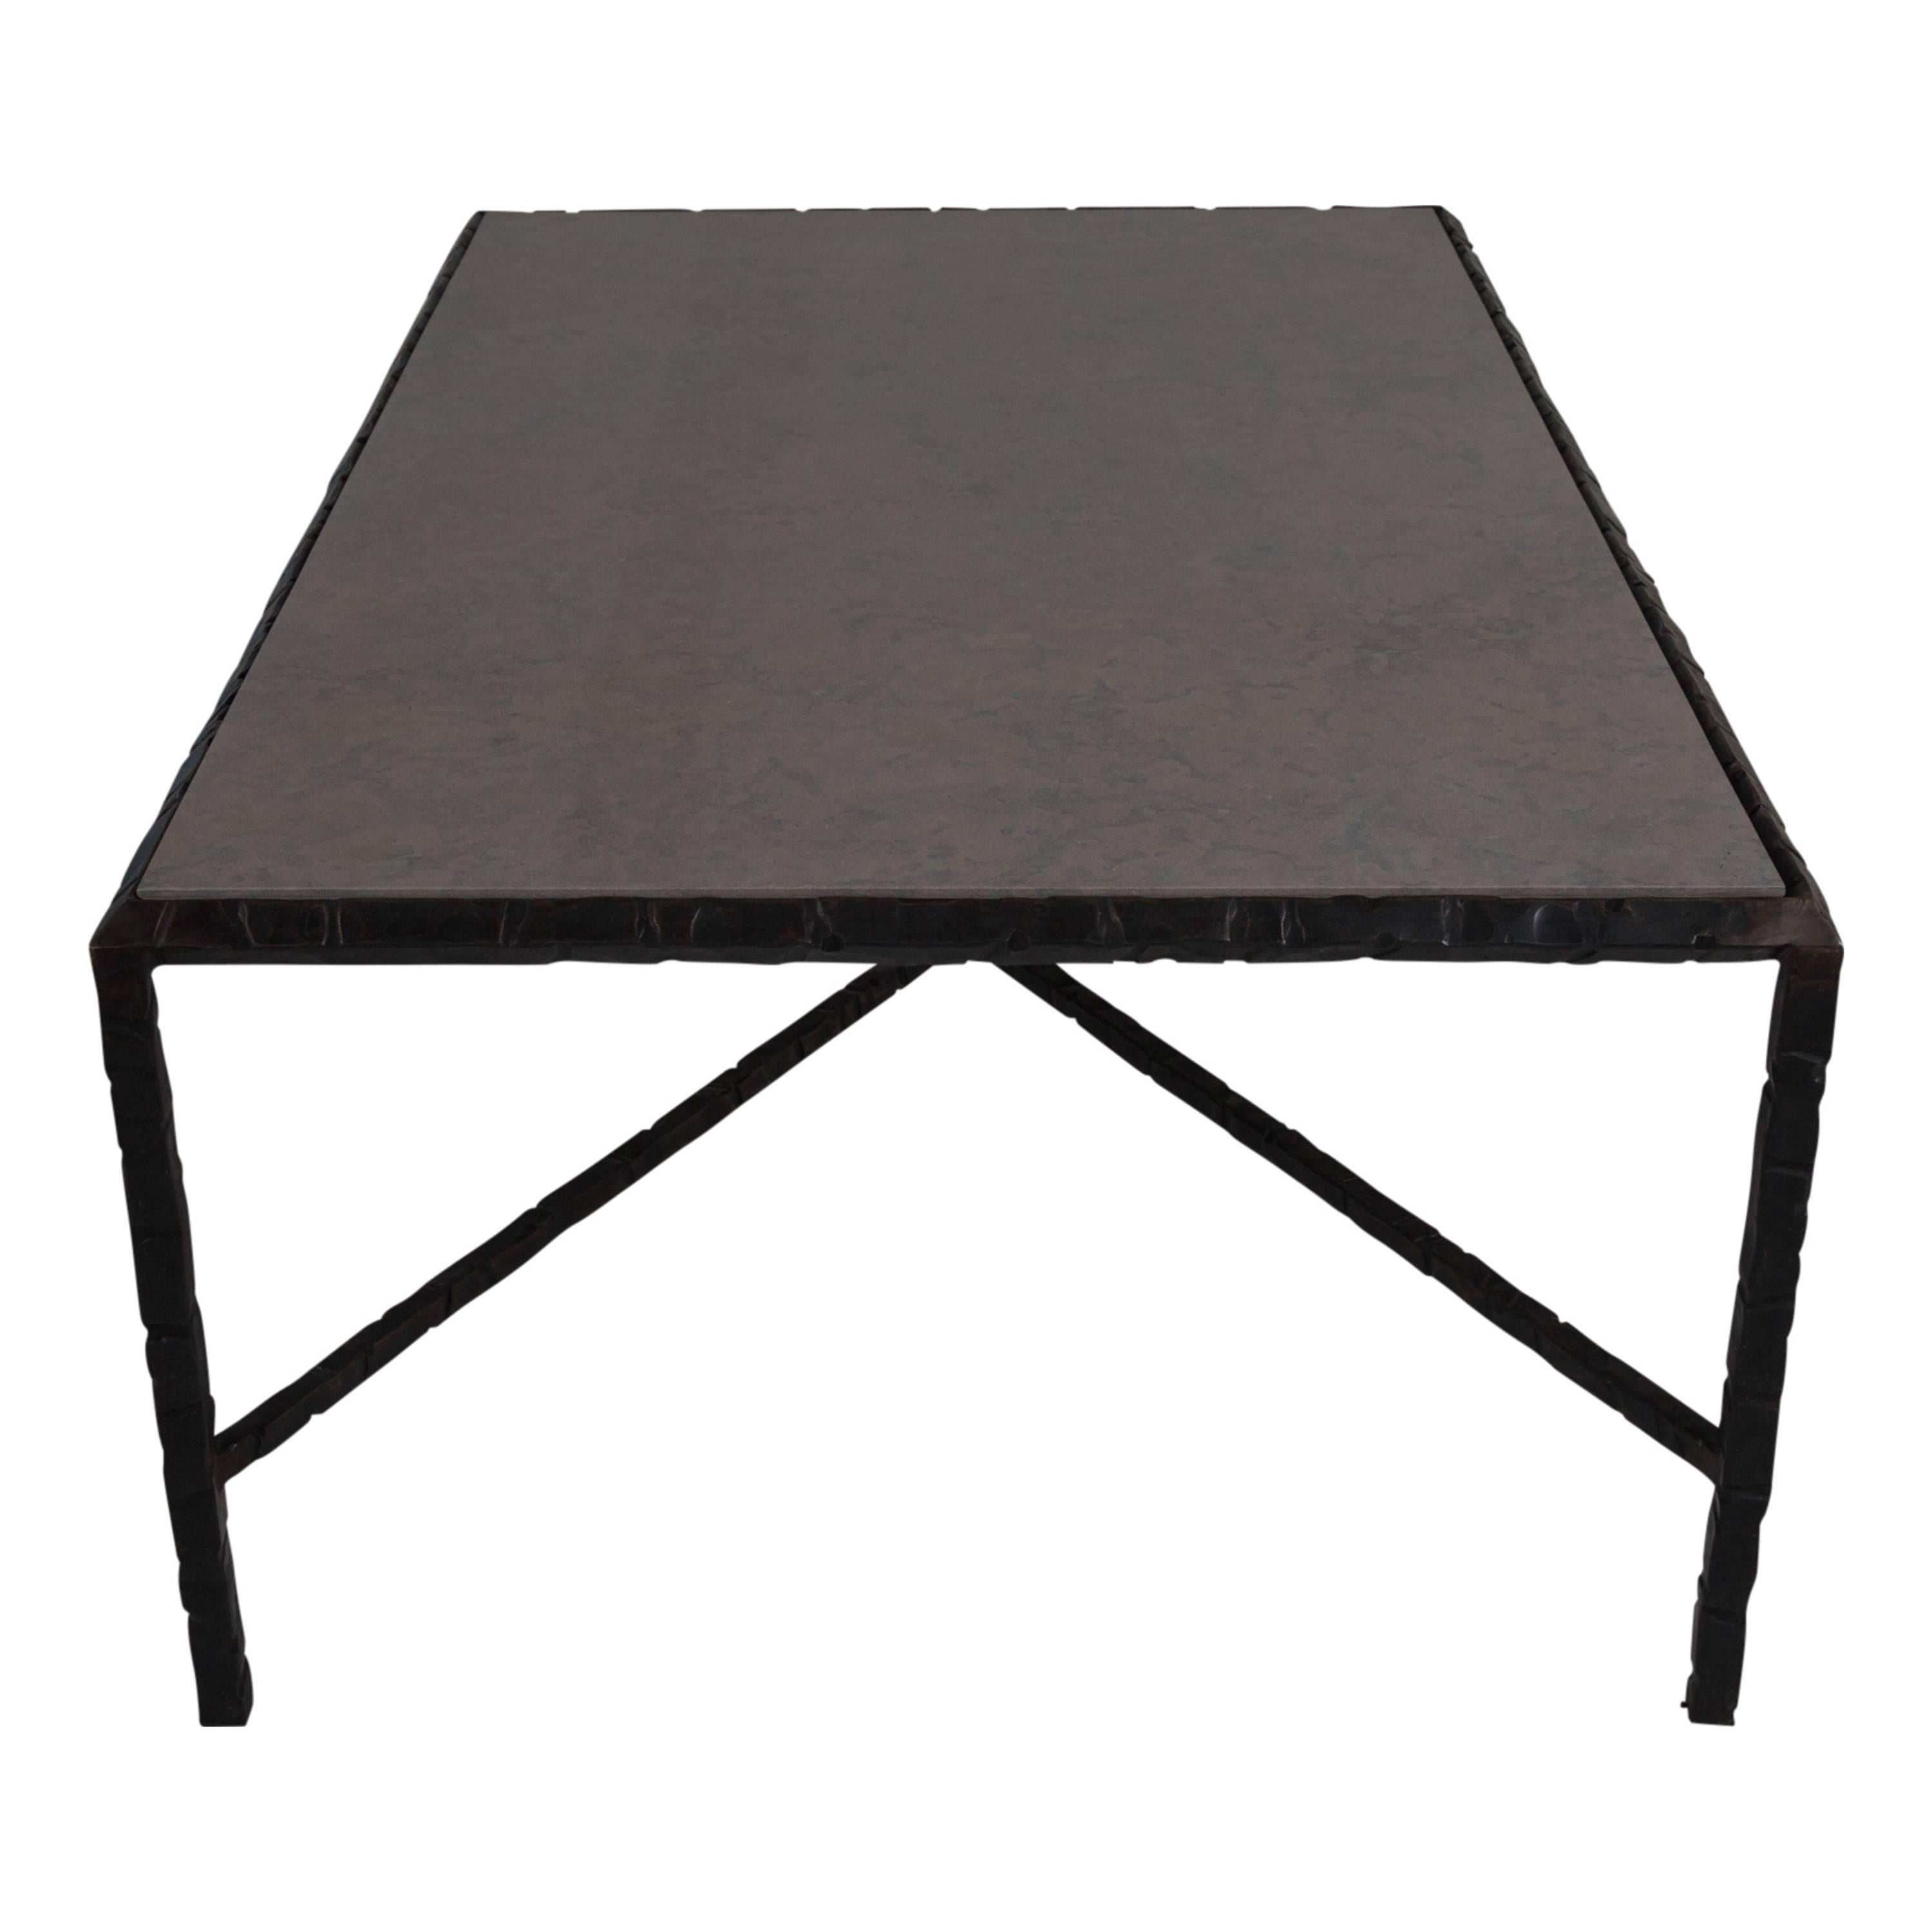 Modern Hammered Steel Coffee Table, Bronze Patina